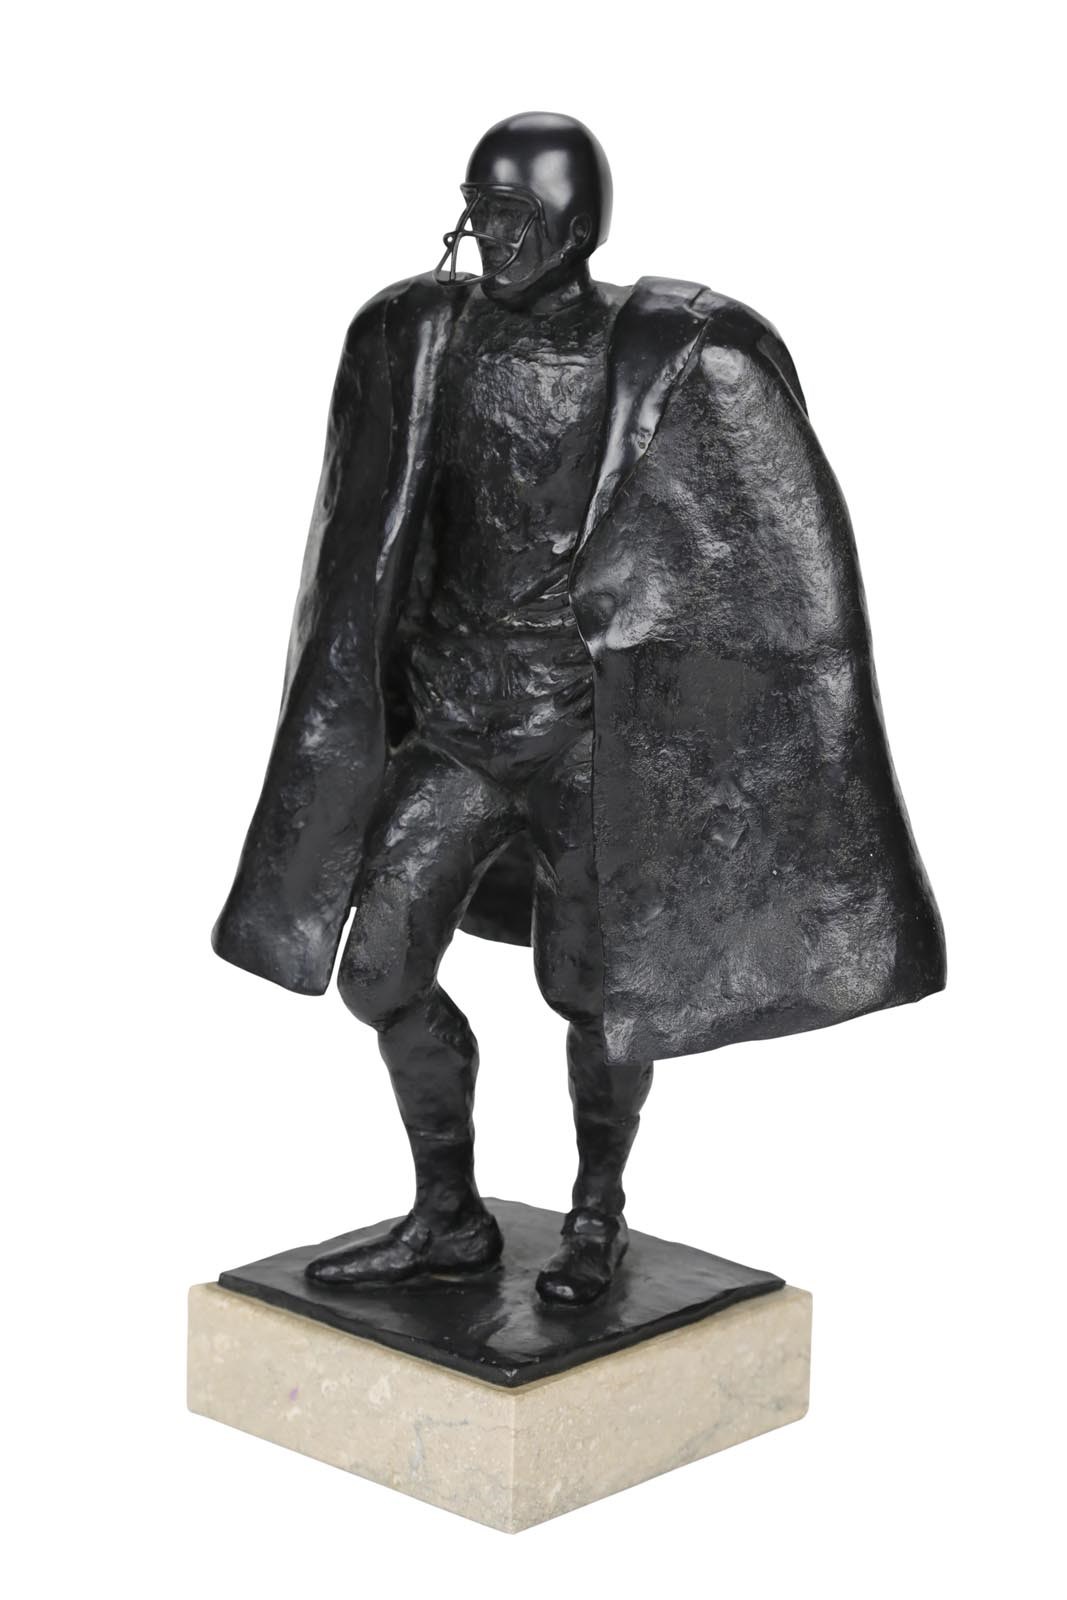 1968 Original Bronze Commissioned by the NFL for the "Walter Payton NFL Man of the Year' Award by Daniel Schwartz